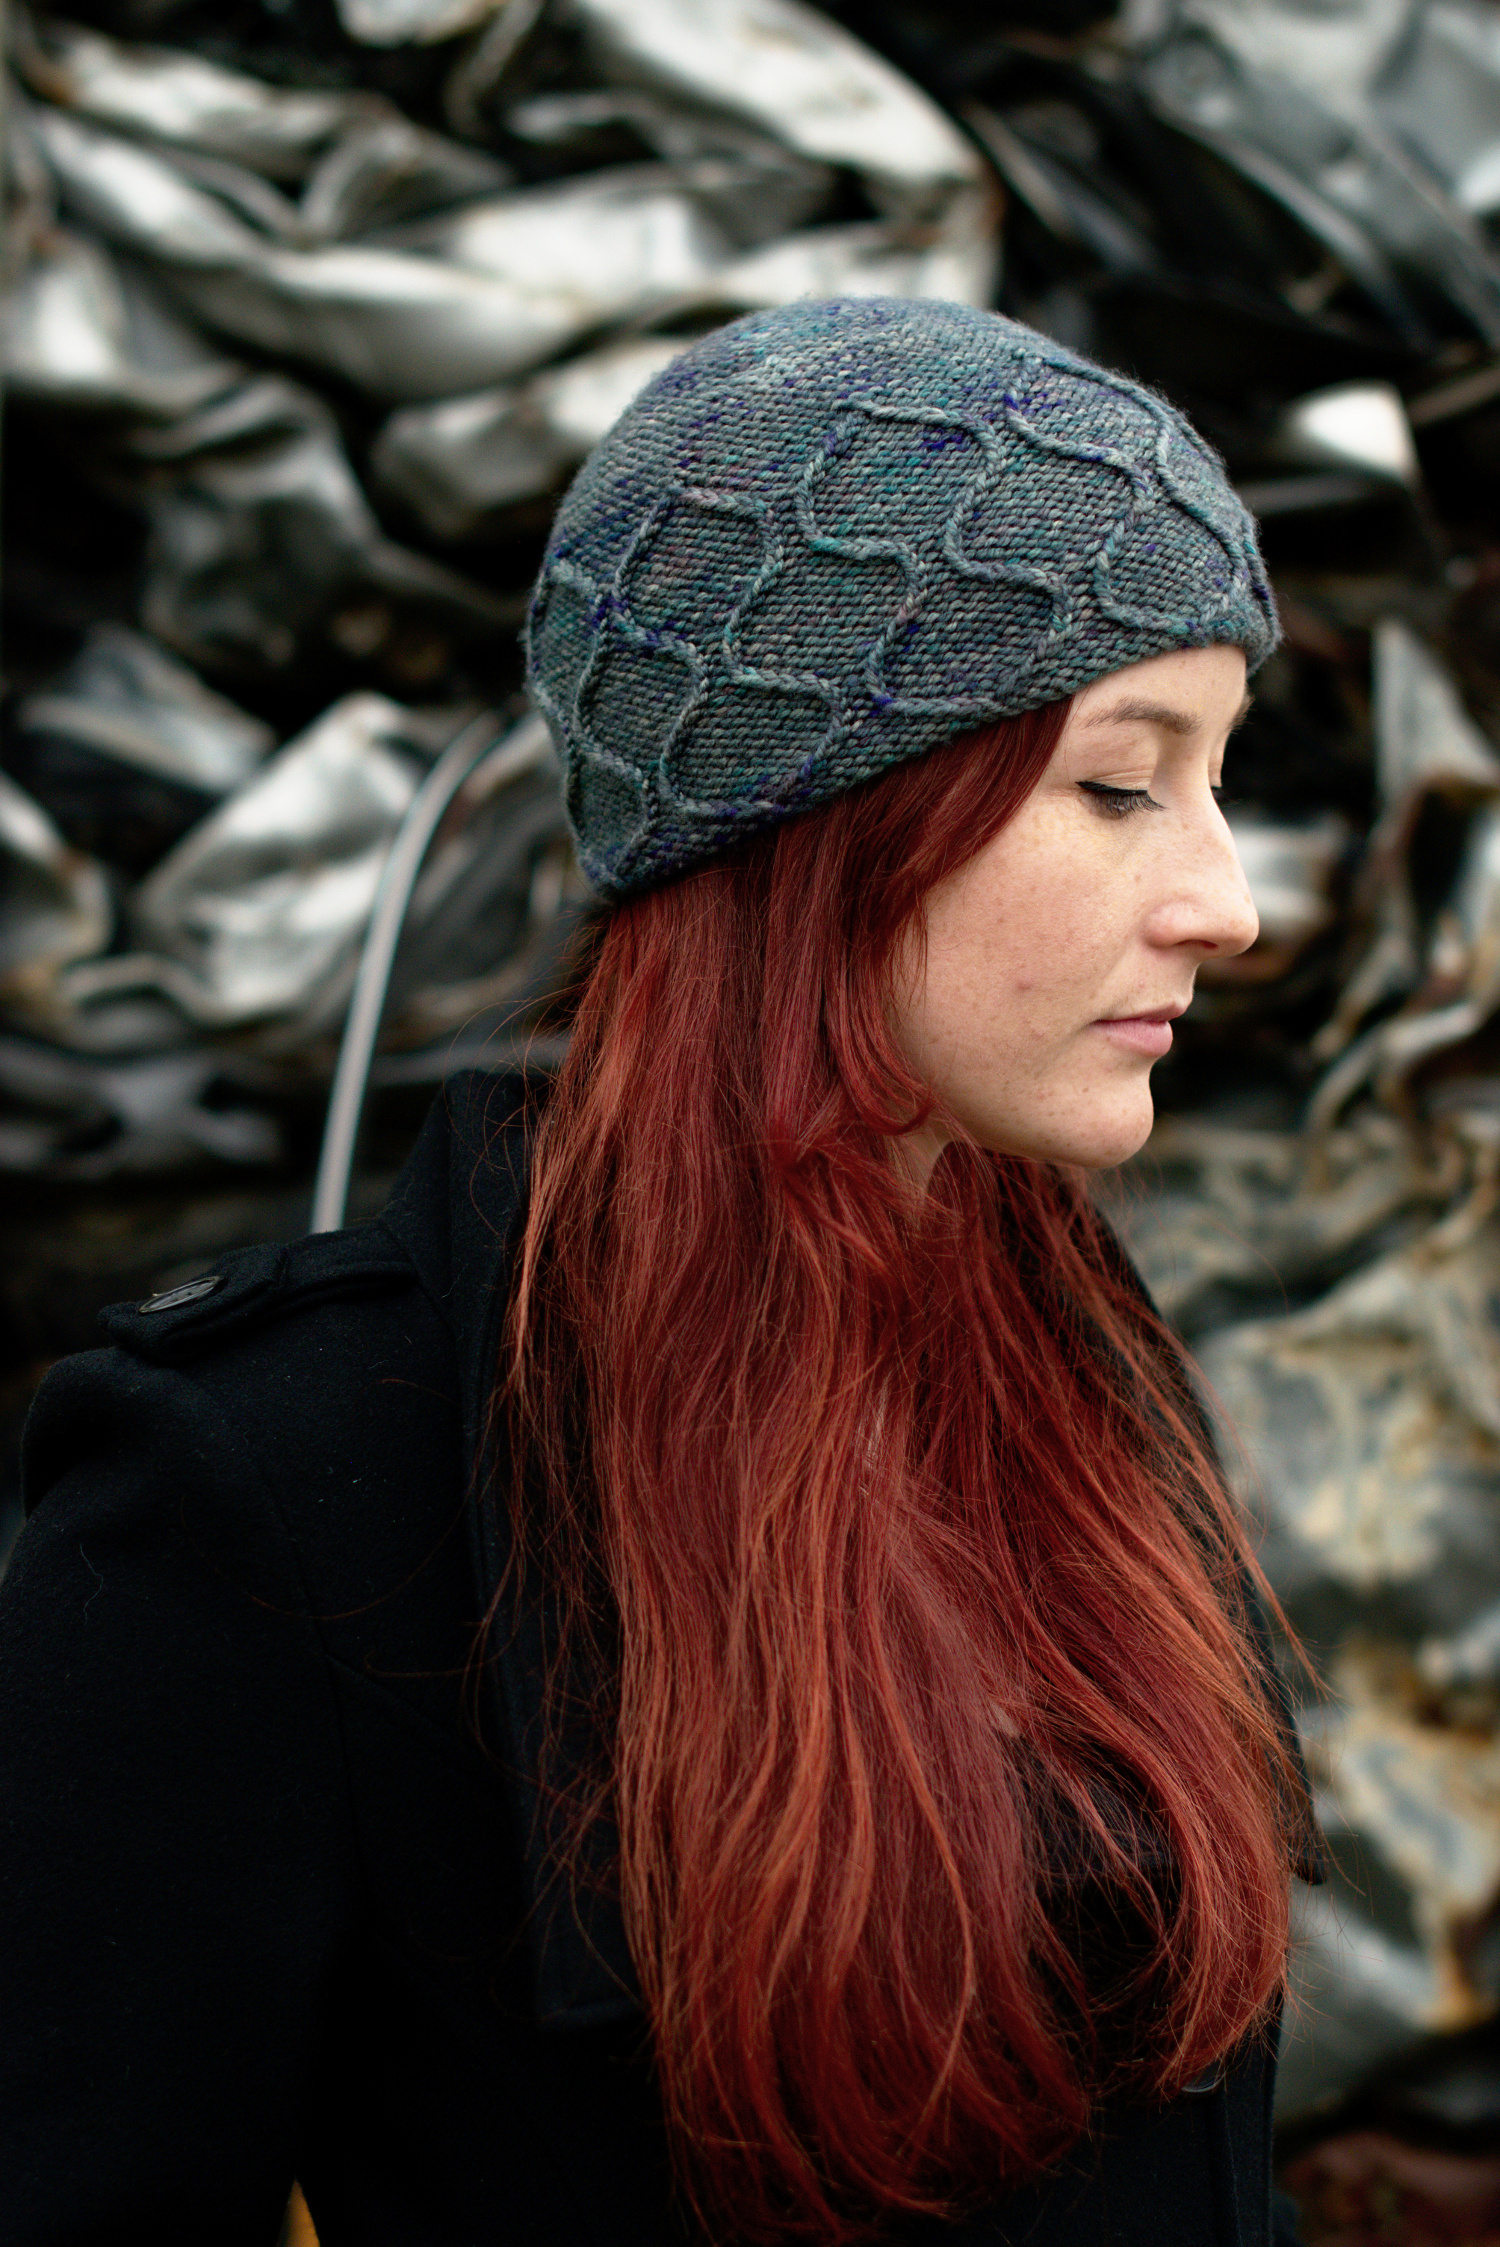 Filigree Beanie hand knitting pattern for an intricate Hat in worsted weight yarn